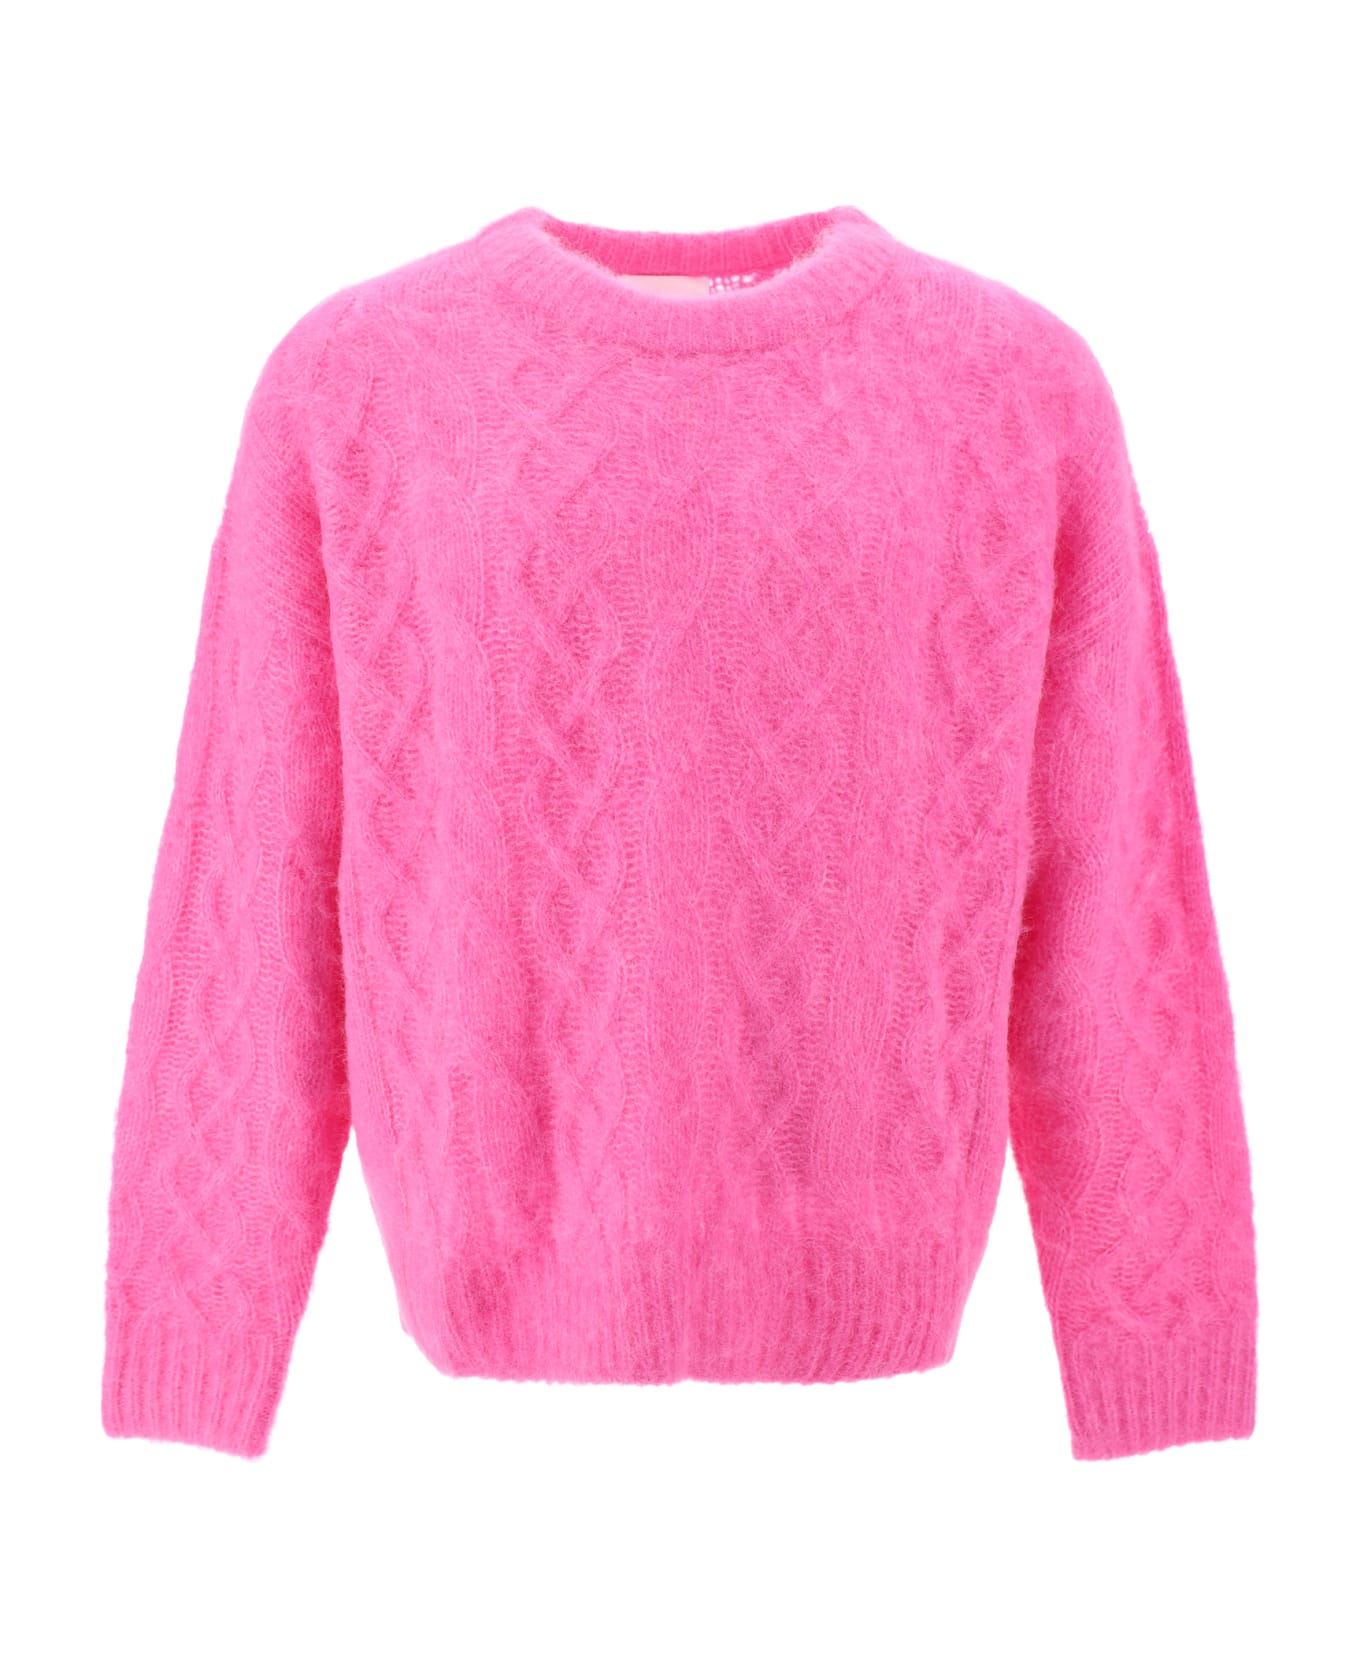 Isabel Marant Anson Sweater - Fluo Pink